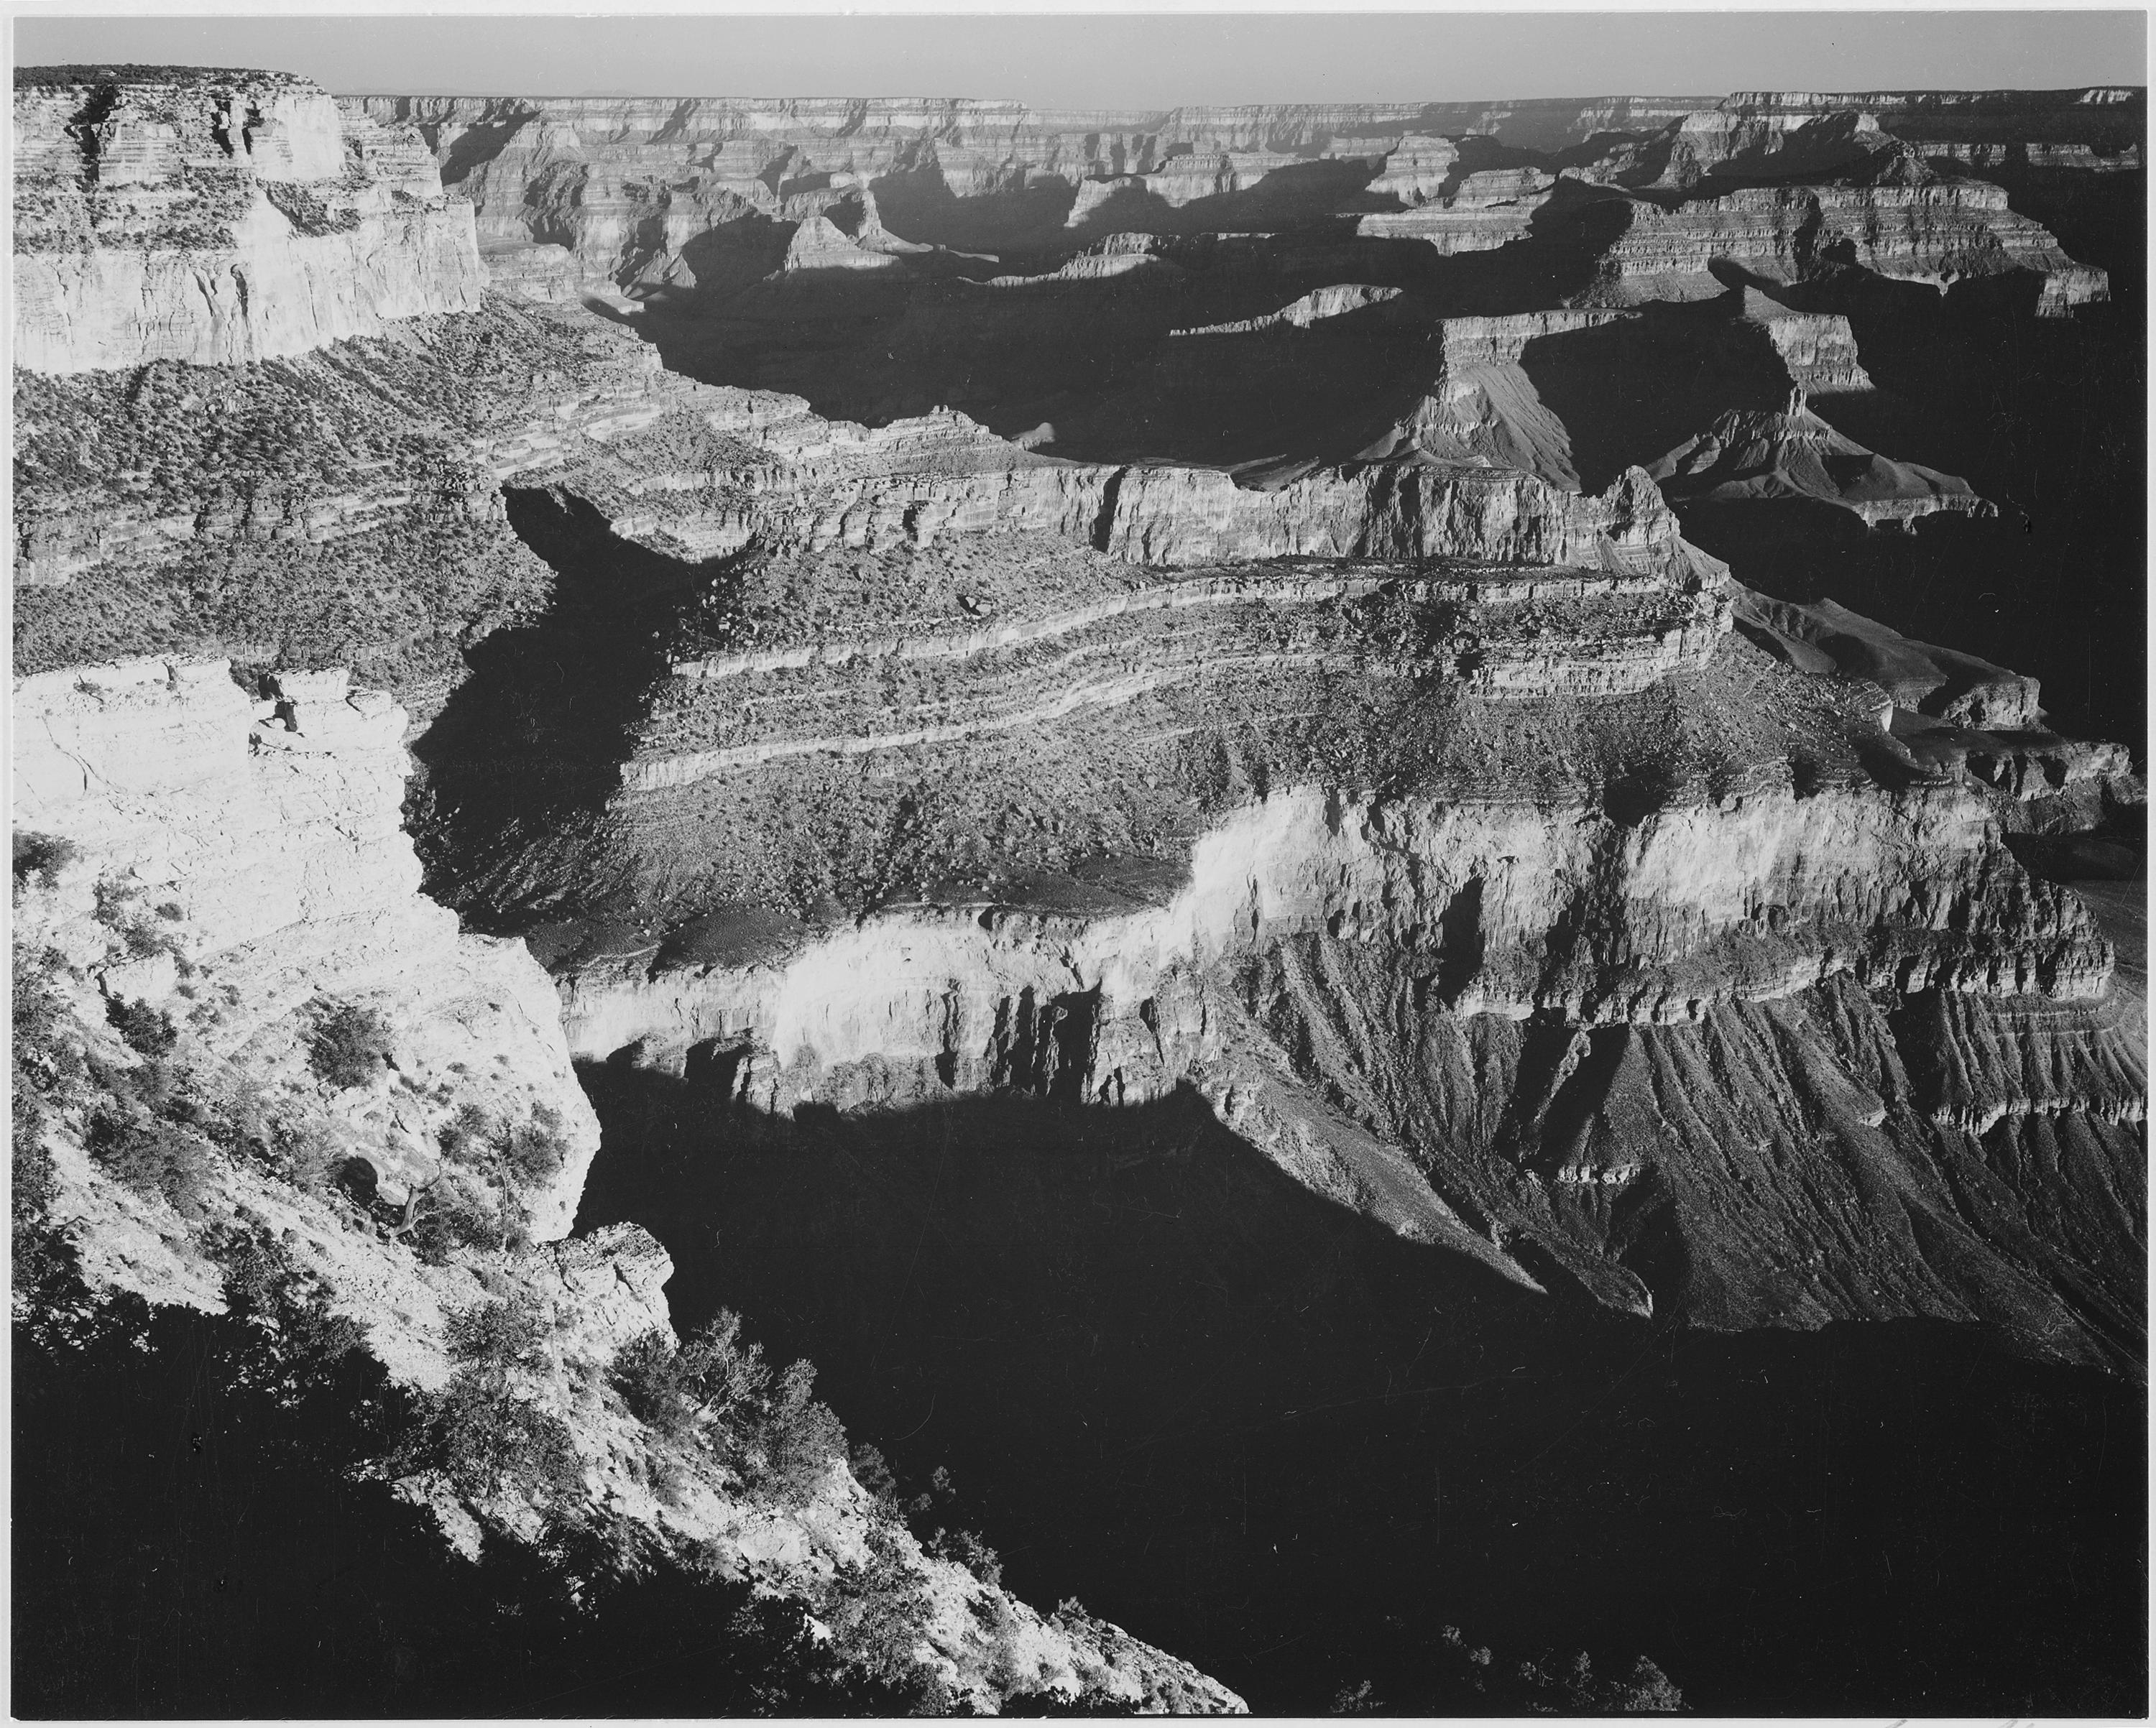 Ansel Adams - National Archives 79-AA-F26